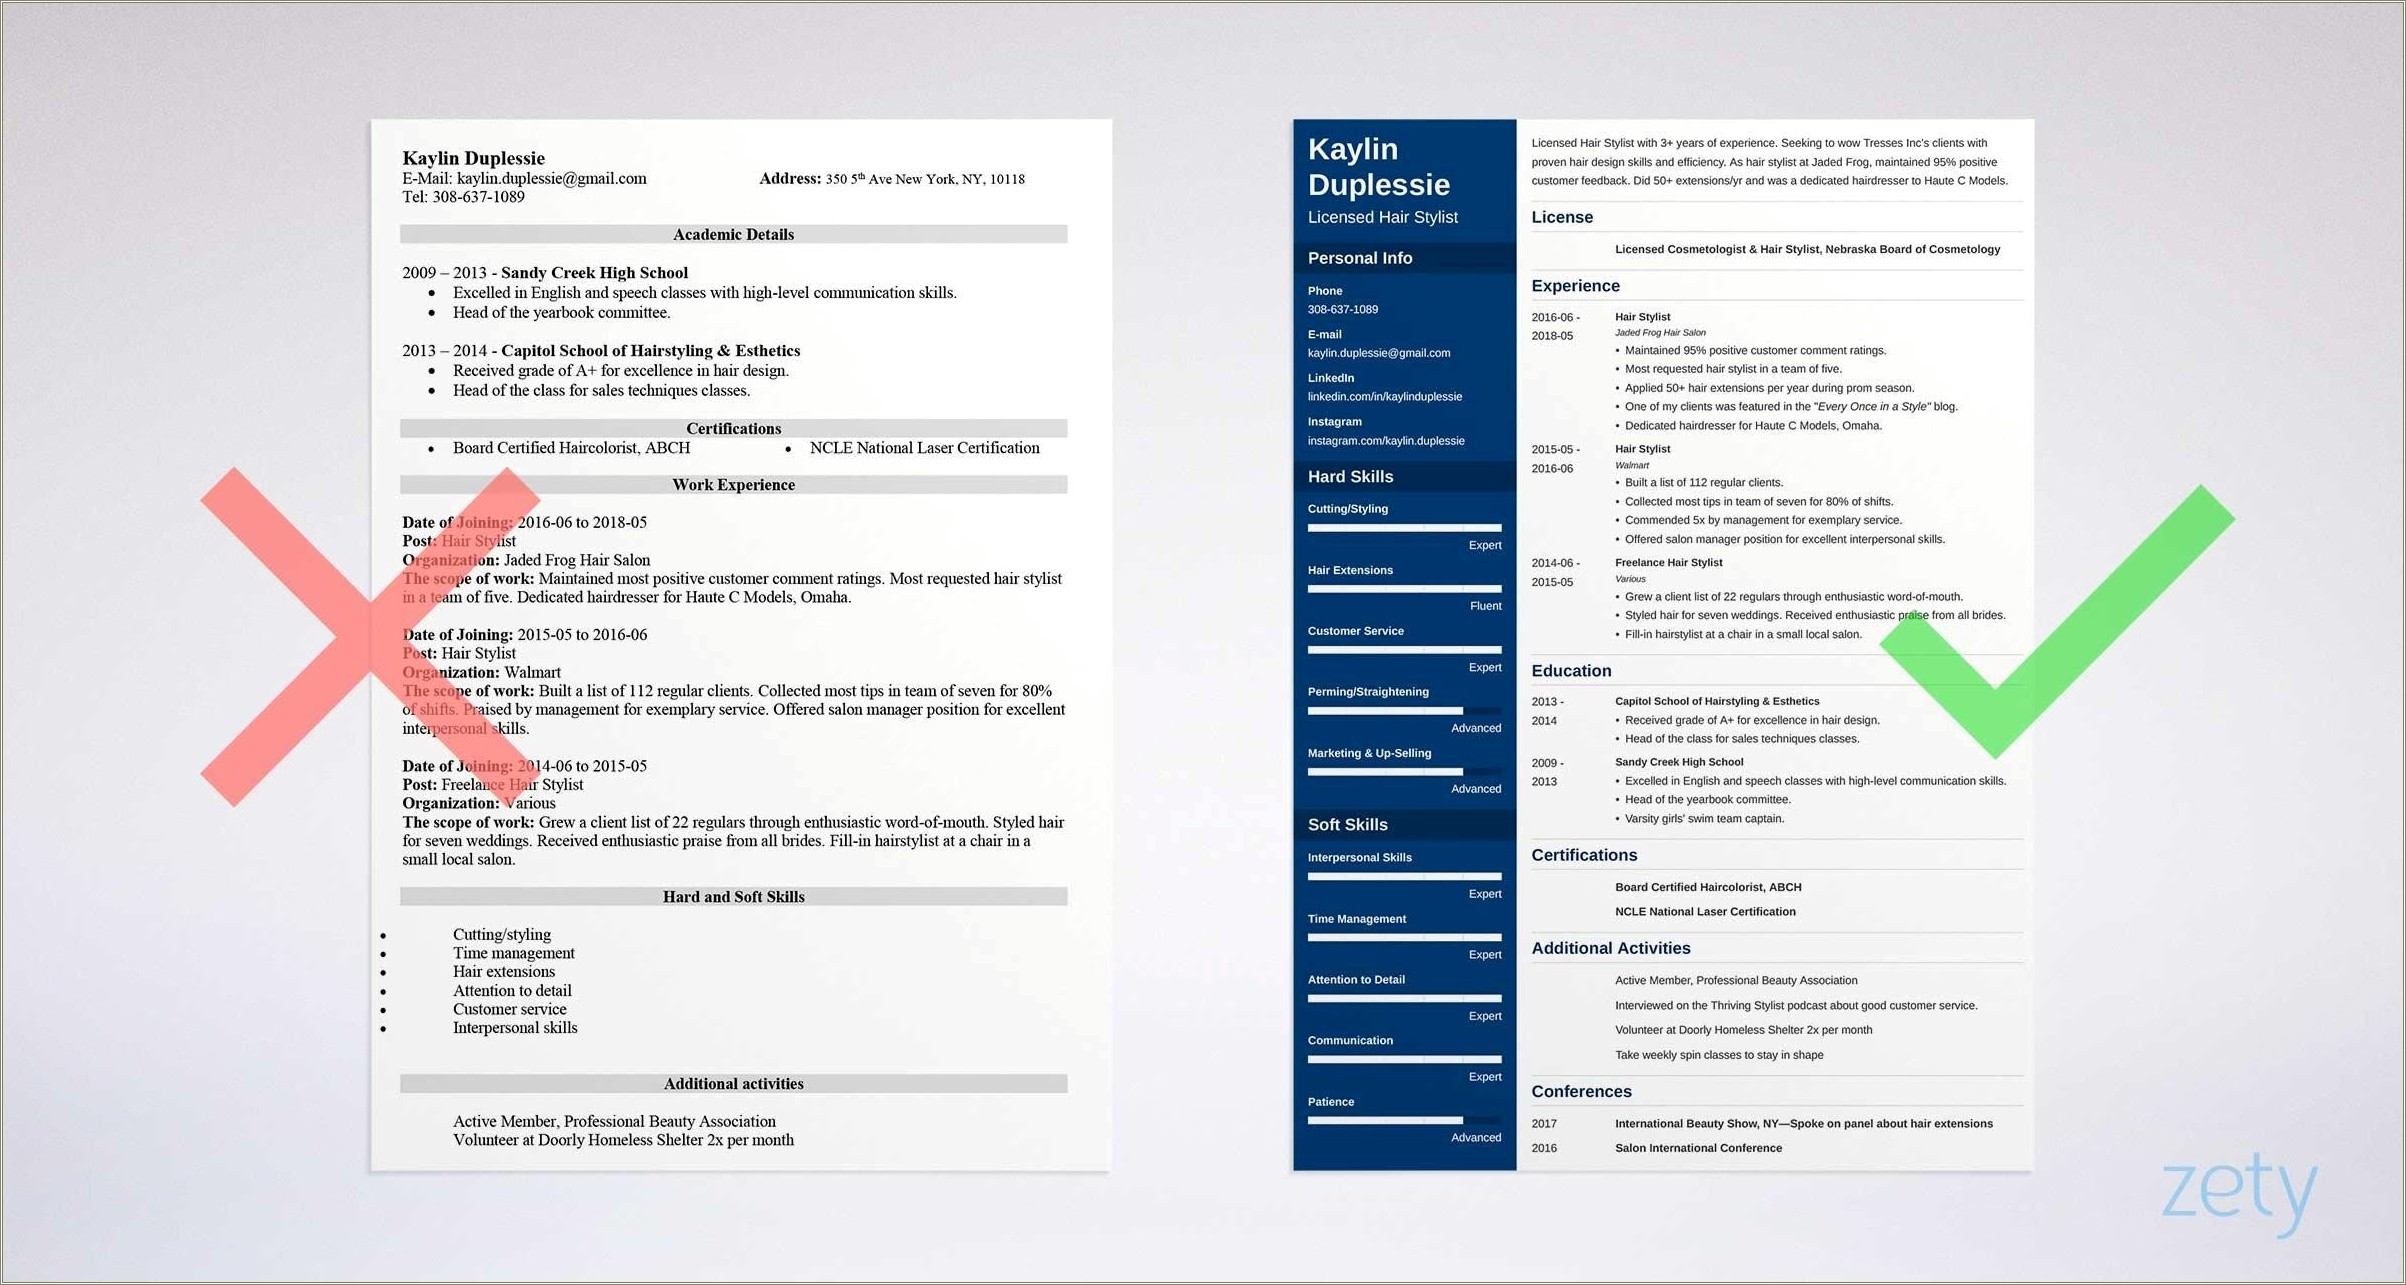 Example Of Resume For Hair Stylist